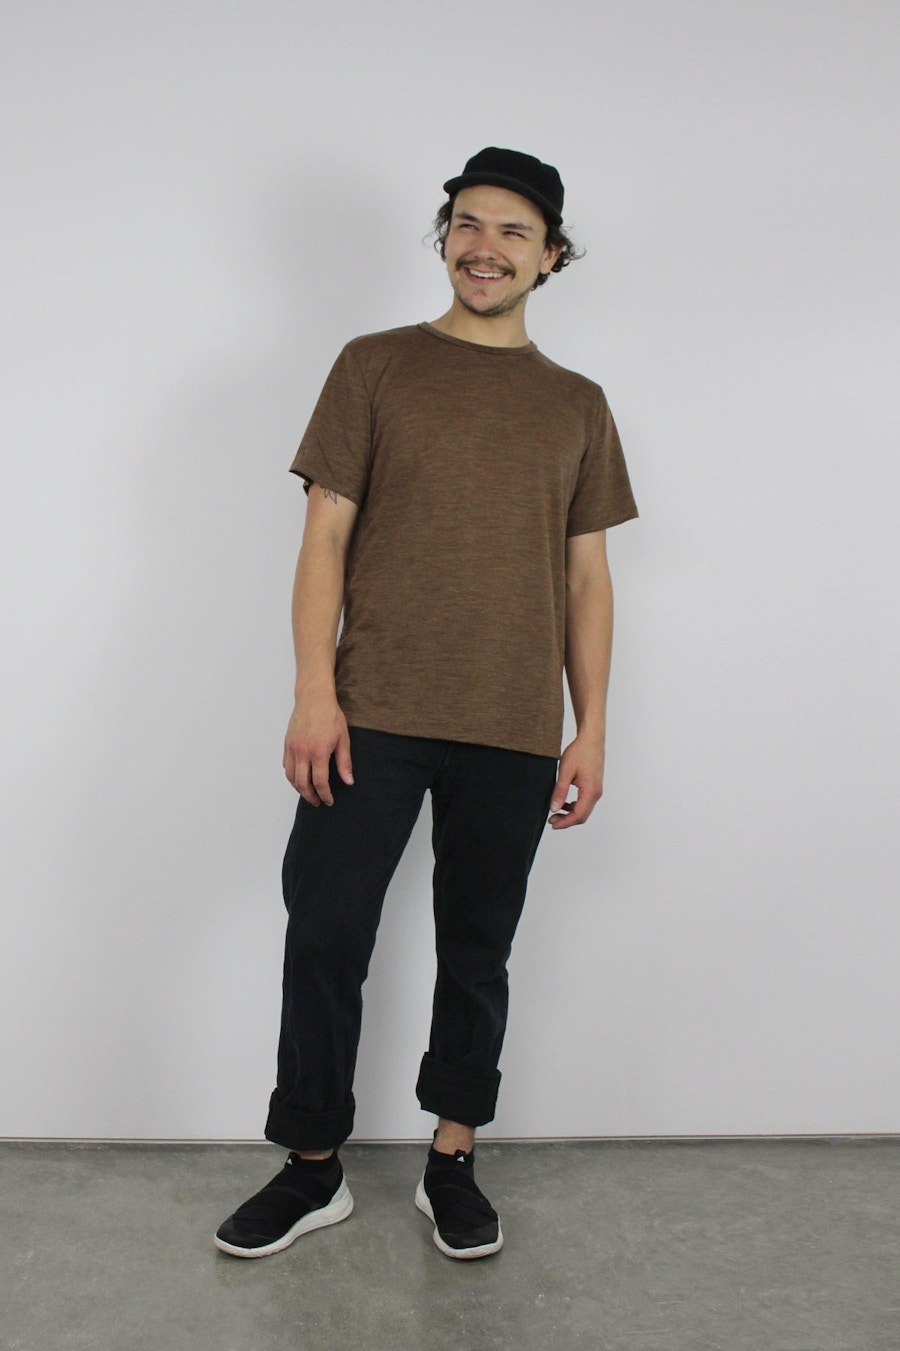 Elbe textiles sage merino tee shirt walnut marle fabric by the fabric store